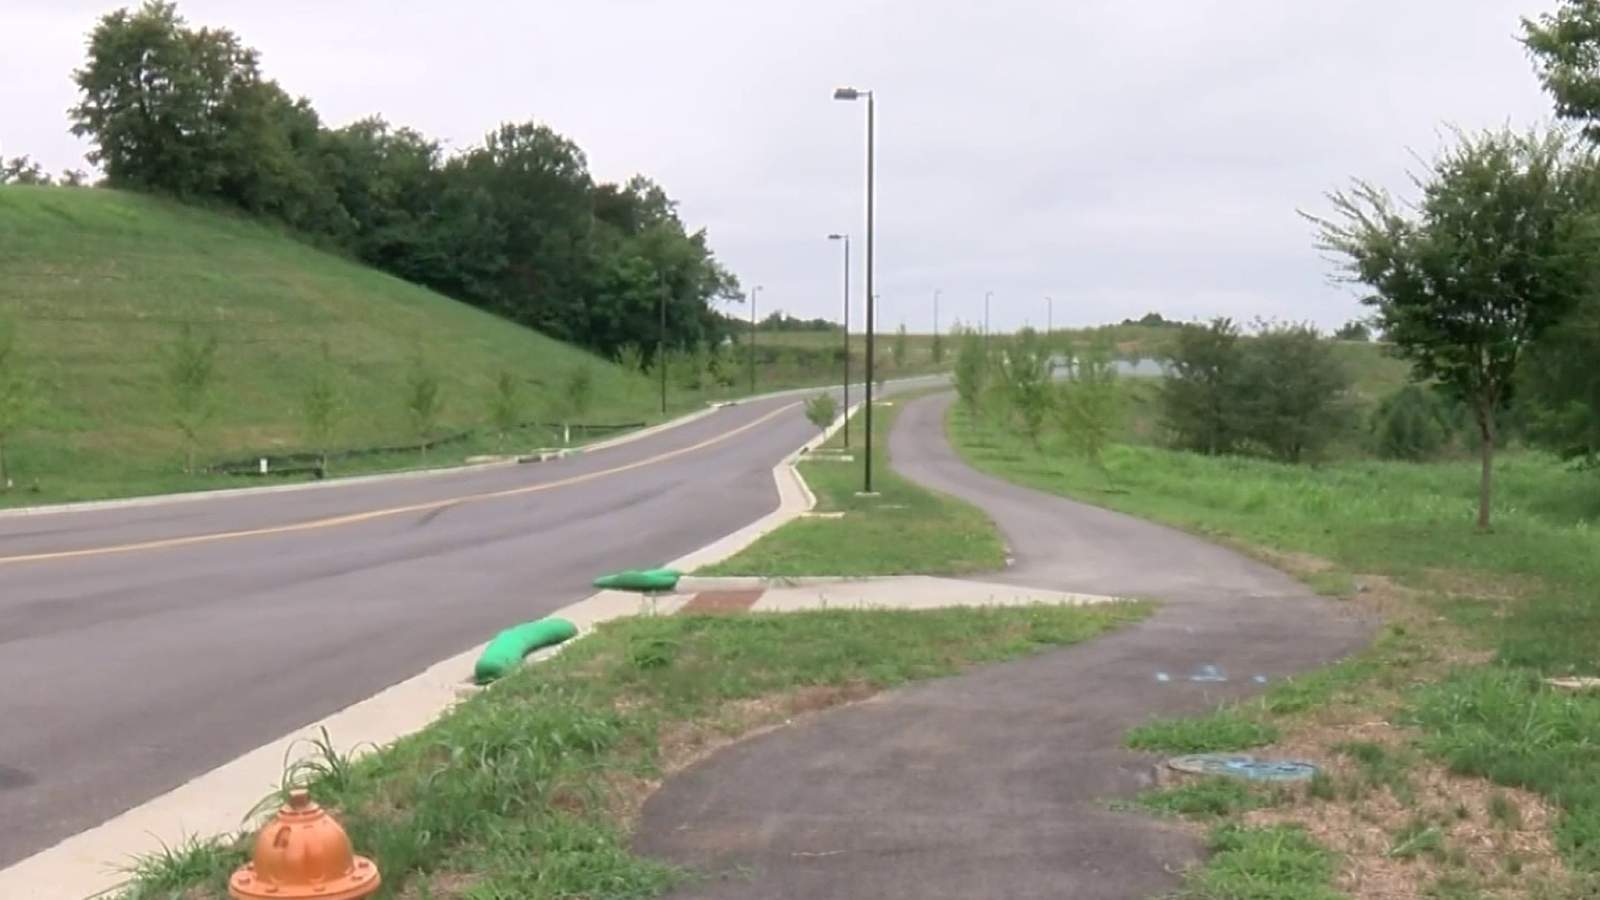 New greenway unveiled in Roanoke